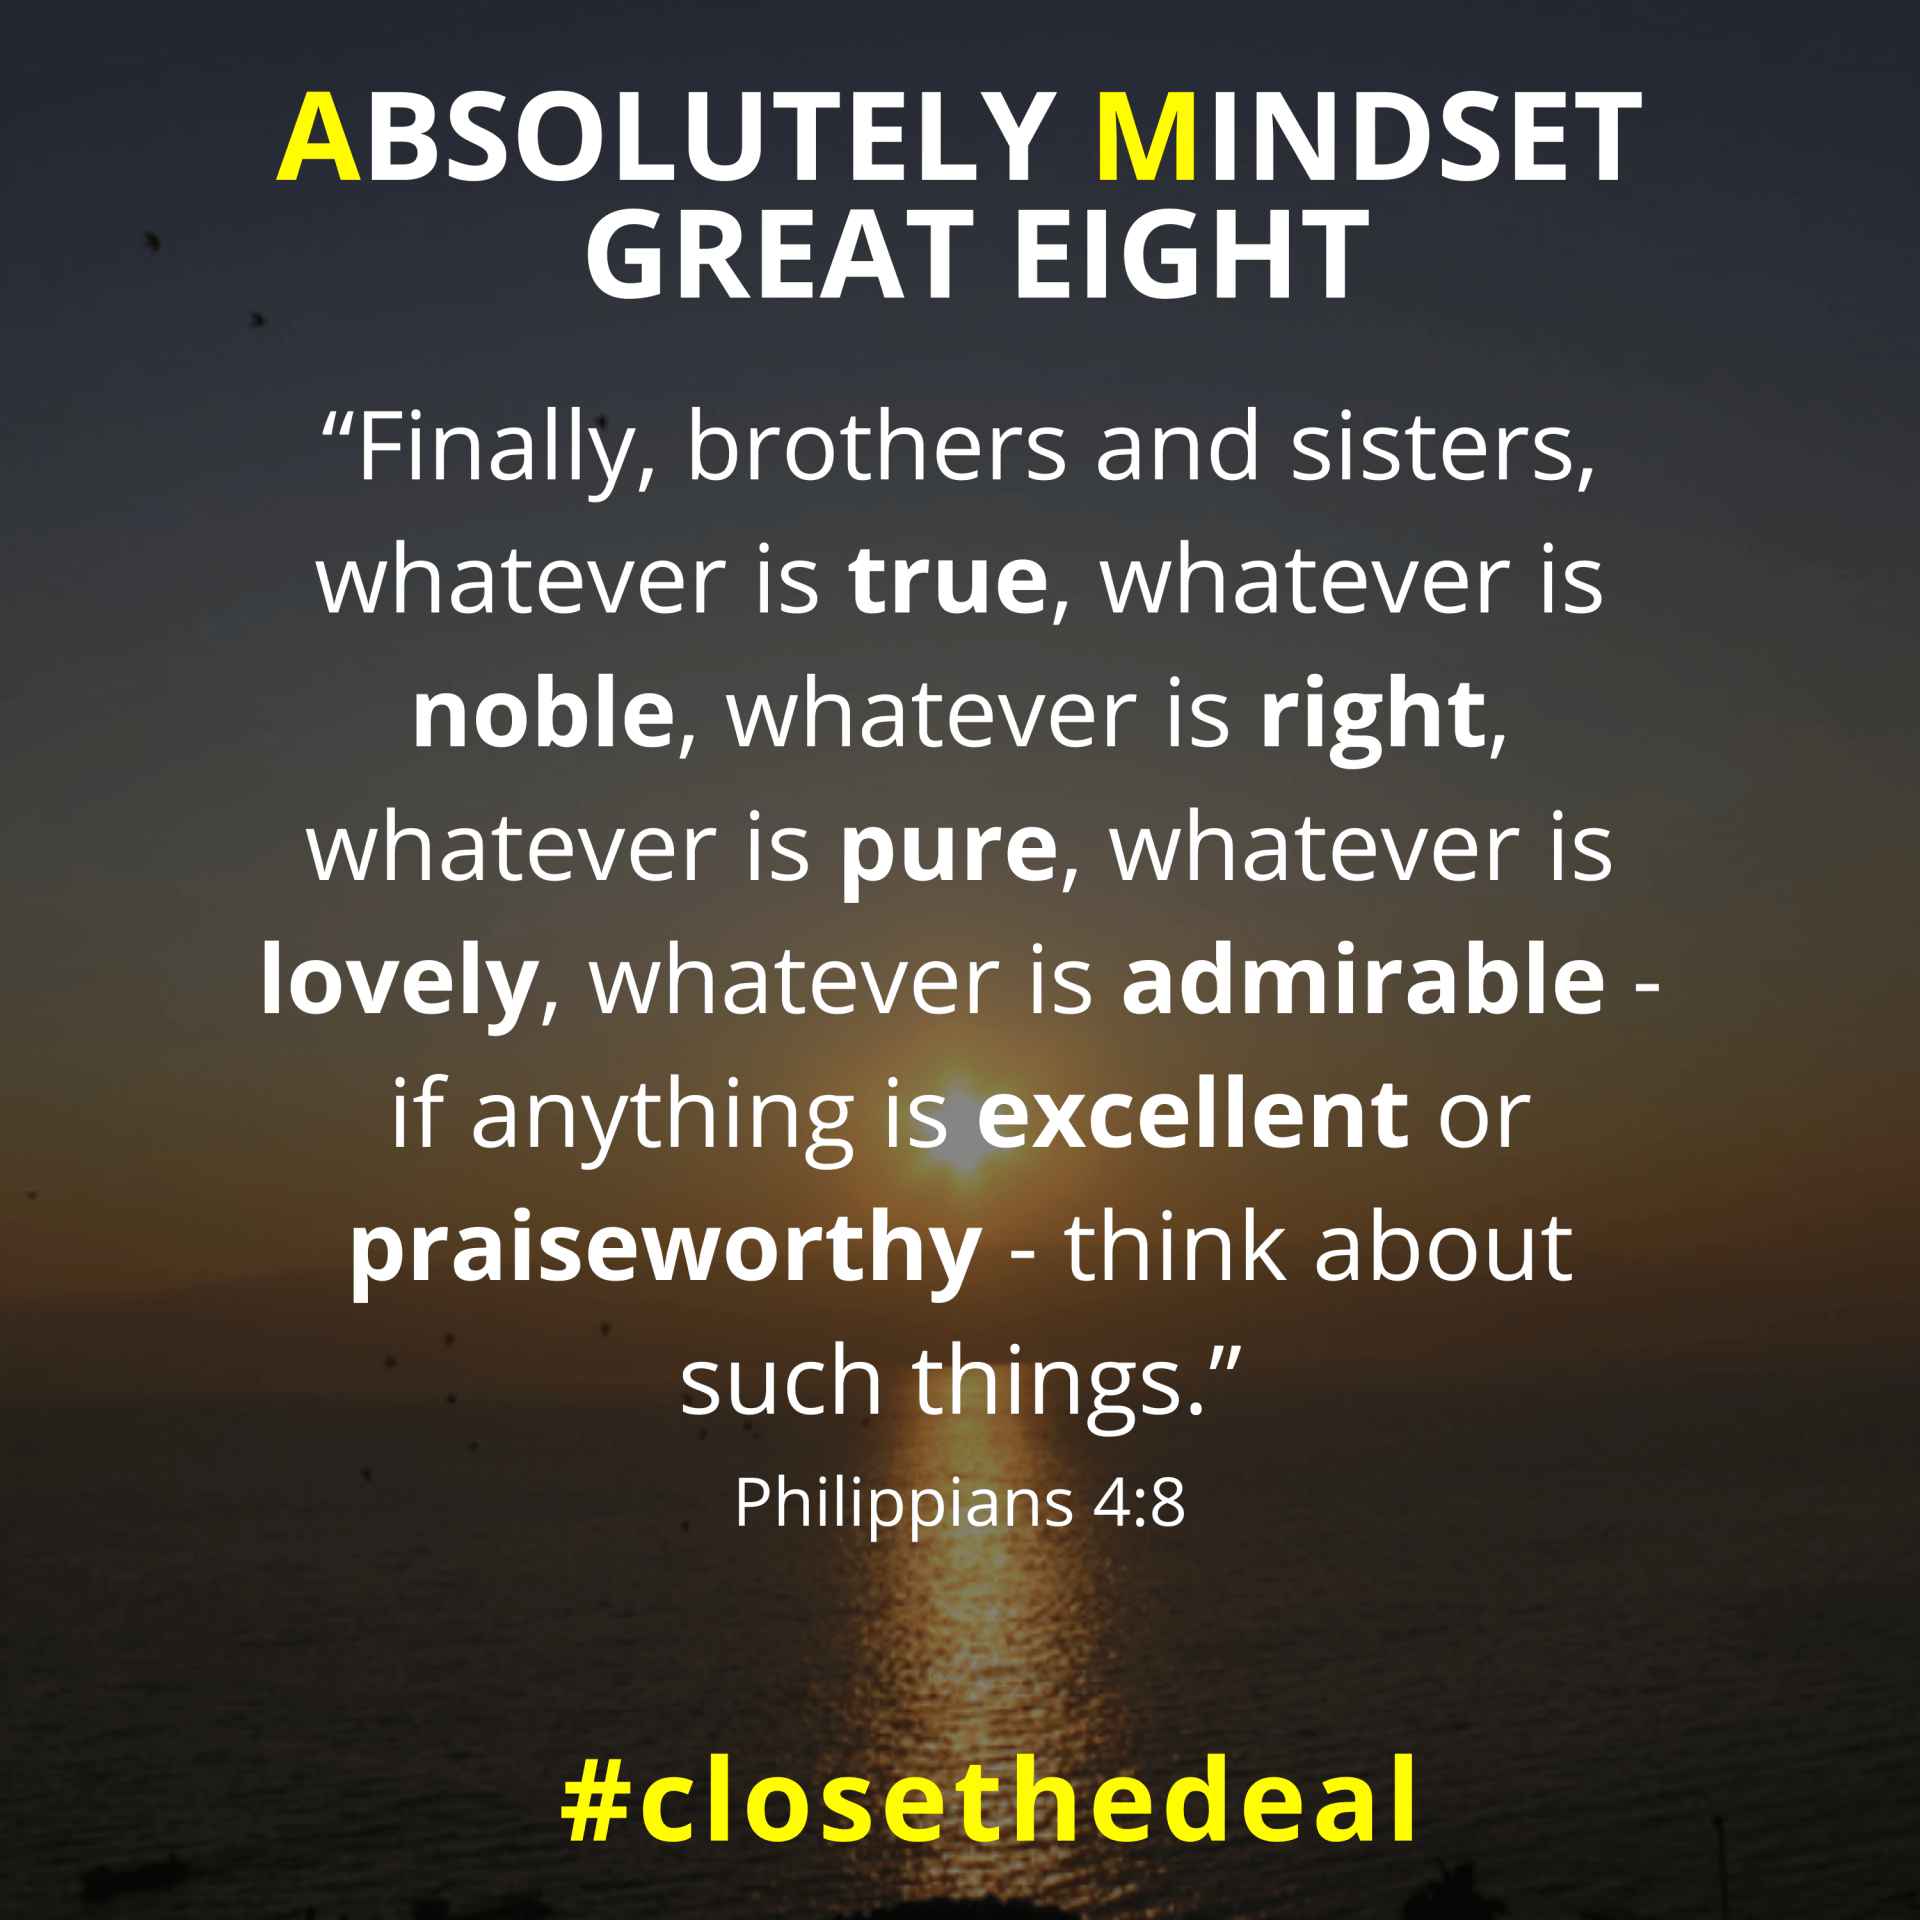 great eight absolutely mindset